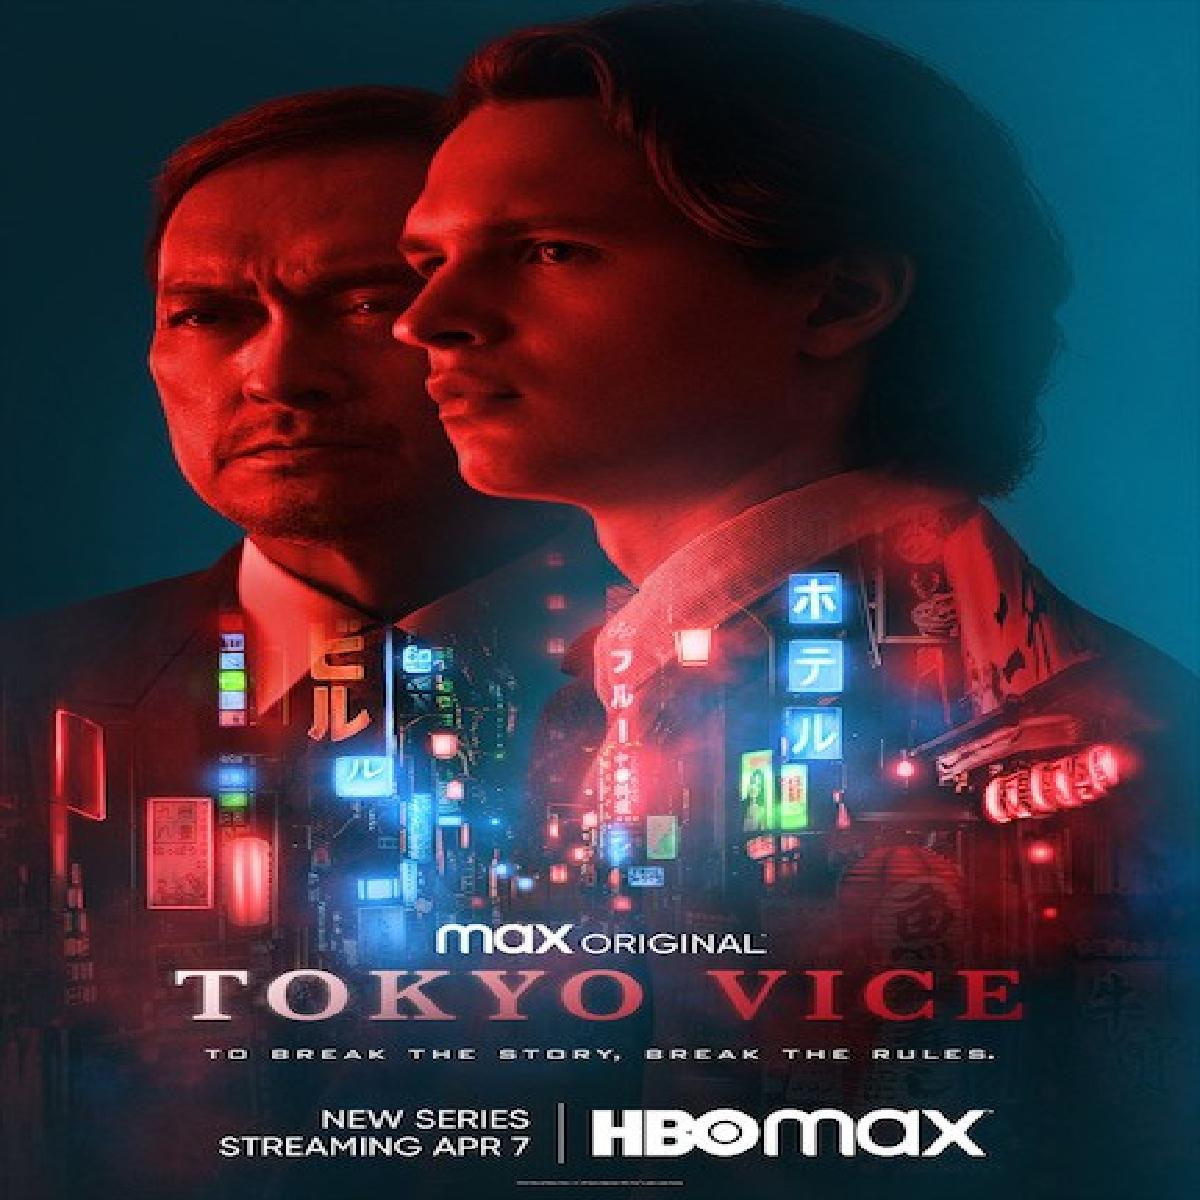 Tokyo Vice Trailer Is Out, Starring Ansel Elgort And Ken Watanabe